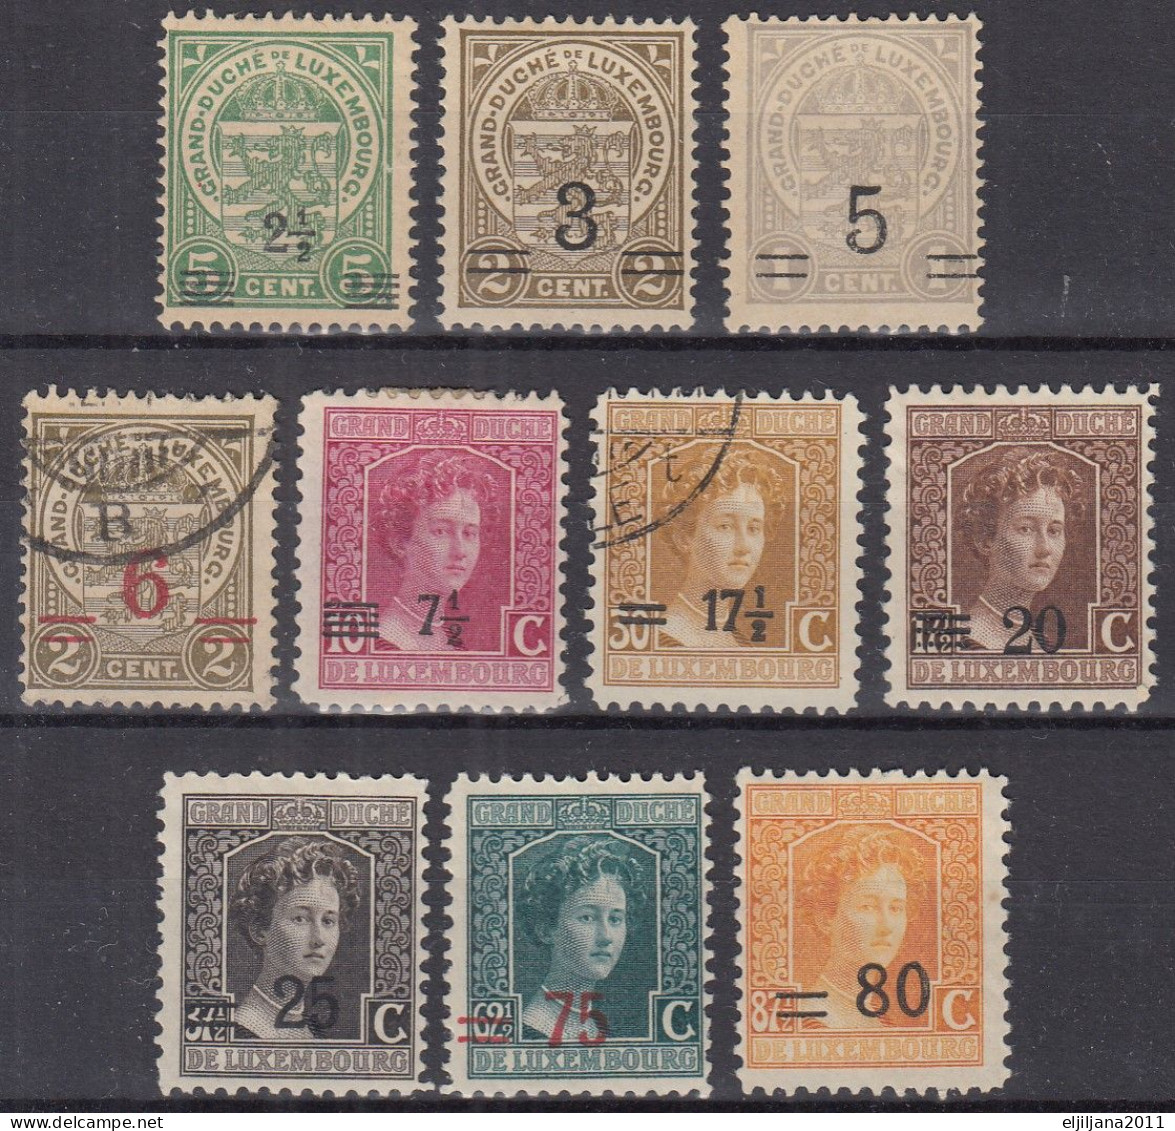 Action !! SALE !! 50 % OFF !! ⁕ LUXEMBOURG 1915 ⁕ Overprint / Surcharge ⁕ 10v MH & Used - 1914-24 Marie-Adelaide